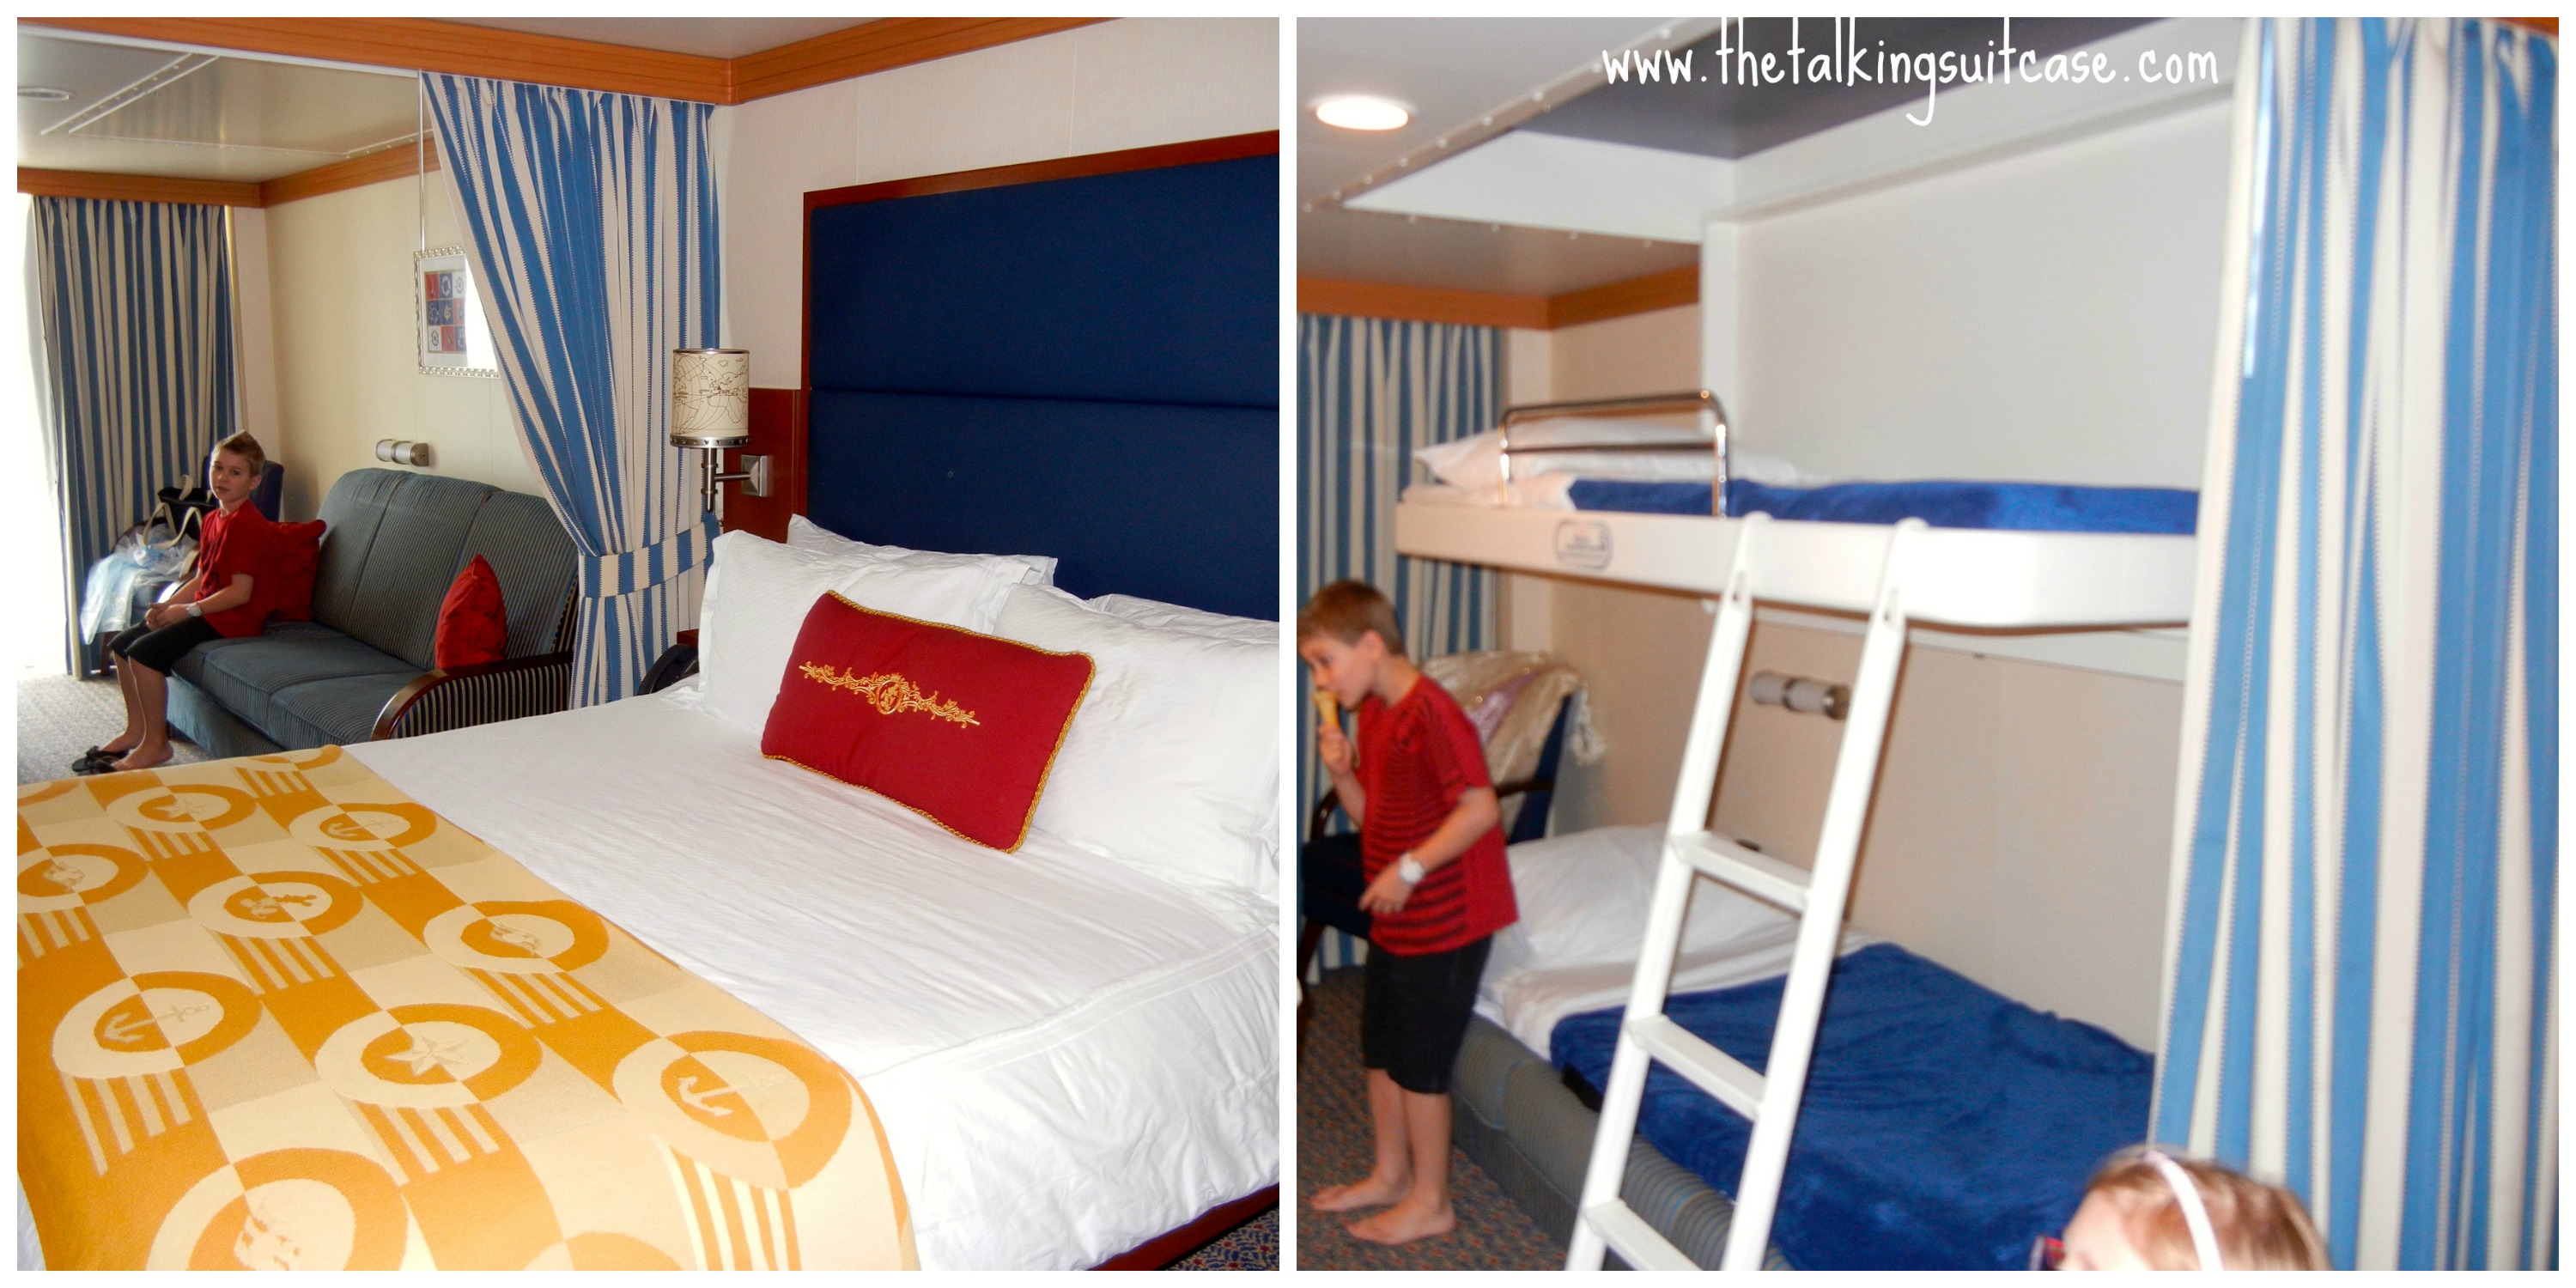 disney cruise line rooms for 5